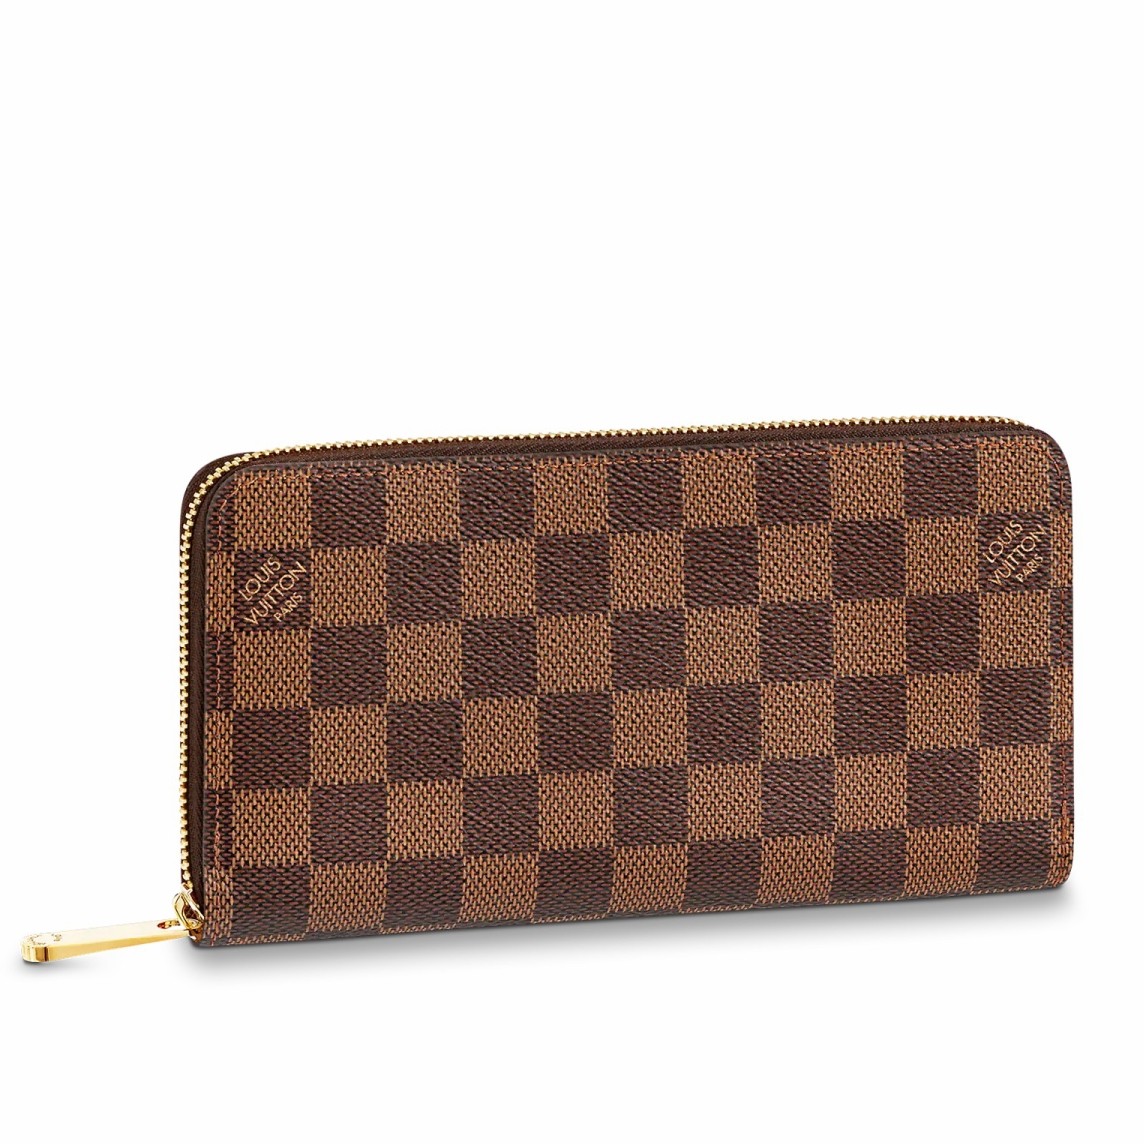 Replica Louis Vuitton LV Vertical Wallet In Taurillon Leather